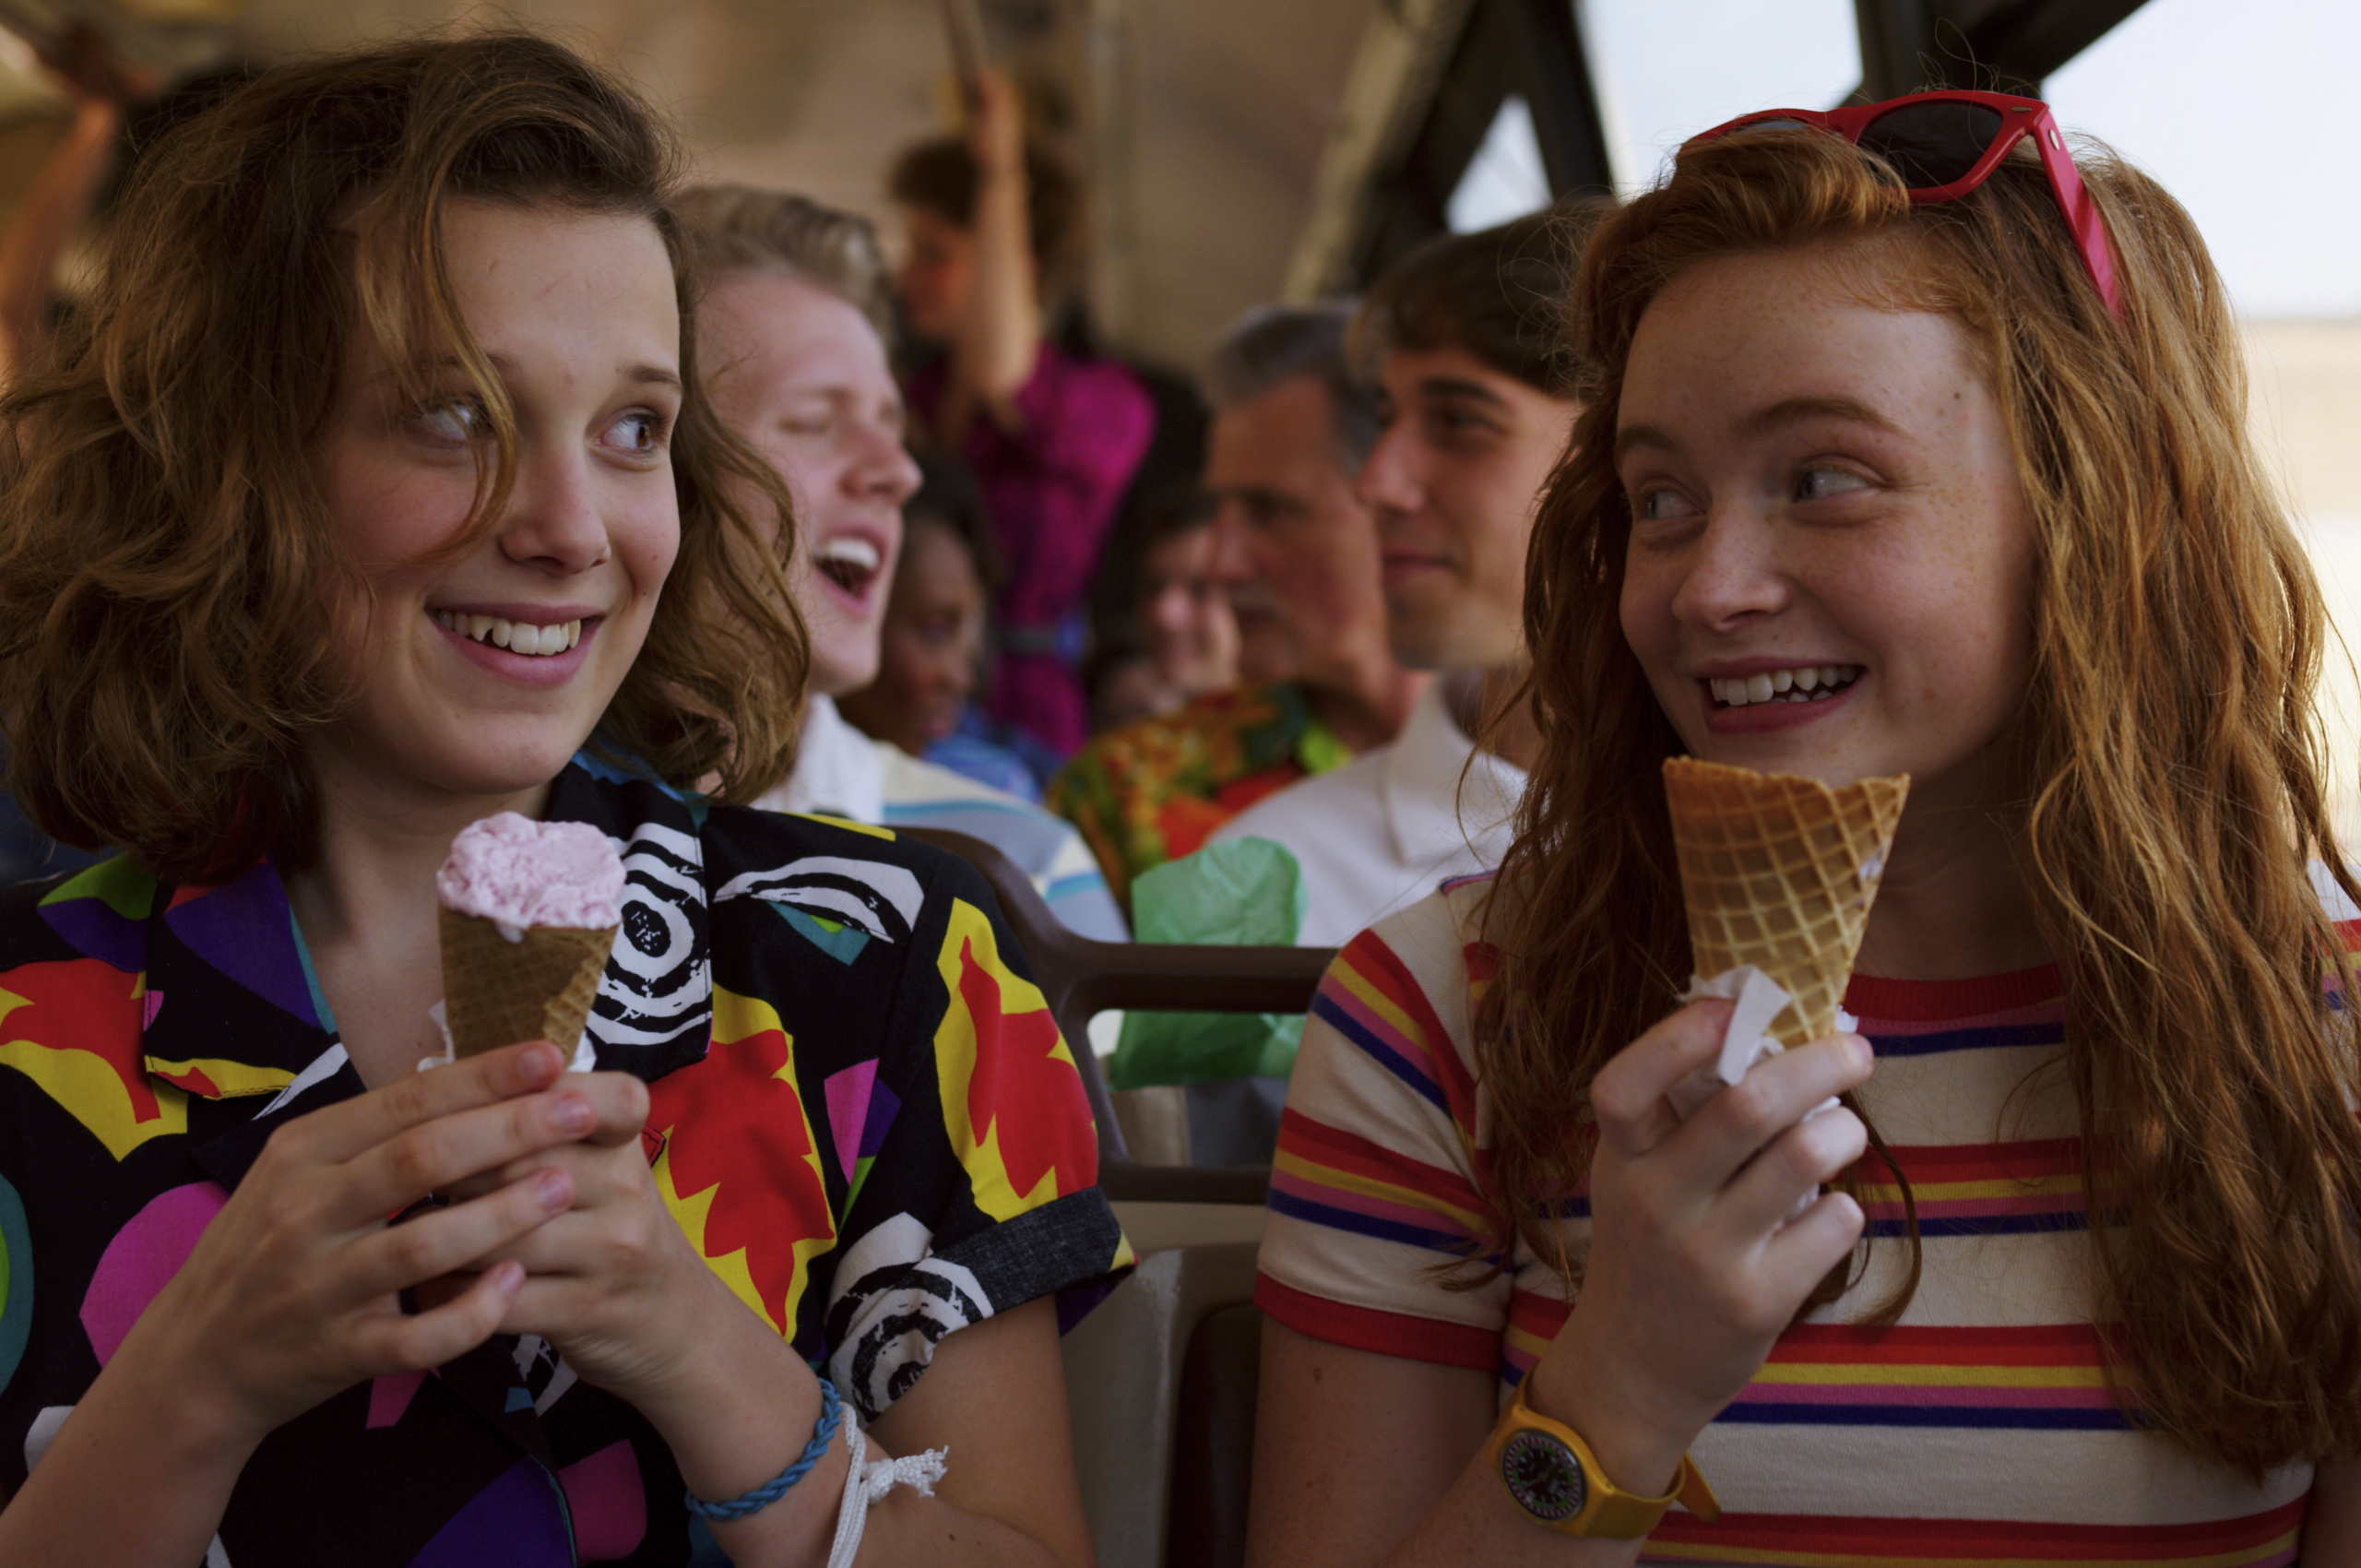 Free download 3840x2400 Sadie Sink and Millie Bobby Brown in Stranger Things [7040x3520] for your Desktop, Mobile & Tablet. Explore Millie Bobby Brown 2019 Wallpaper. Millie Bobby Brown 2019